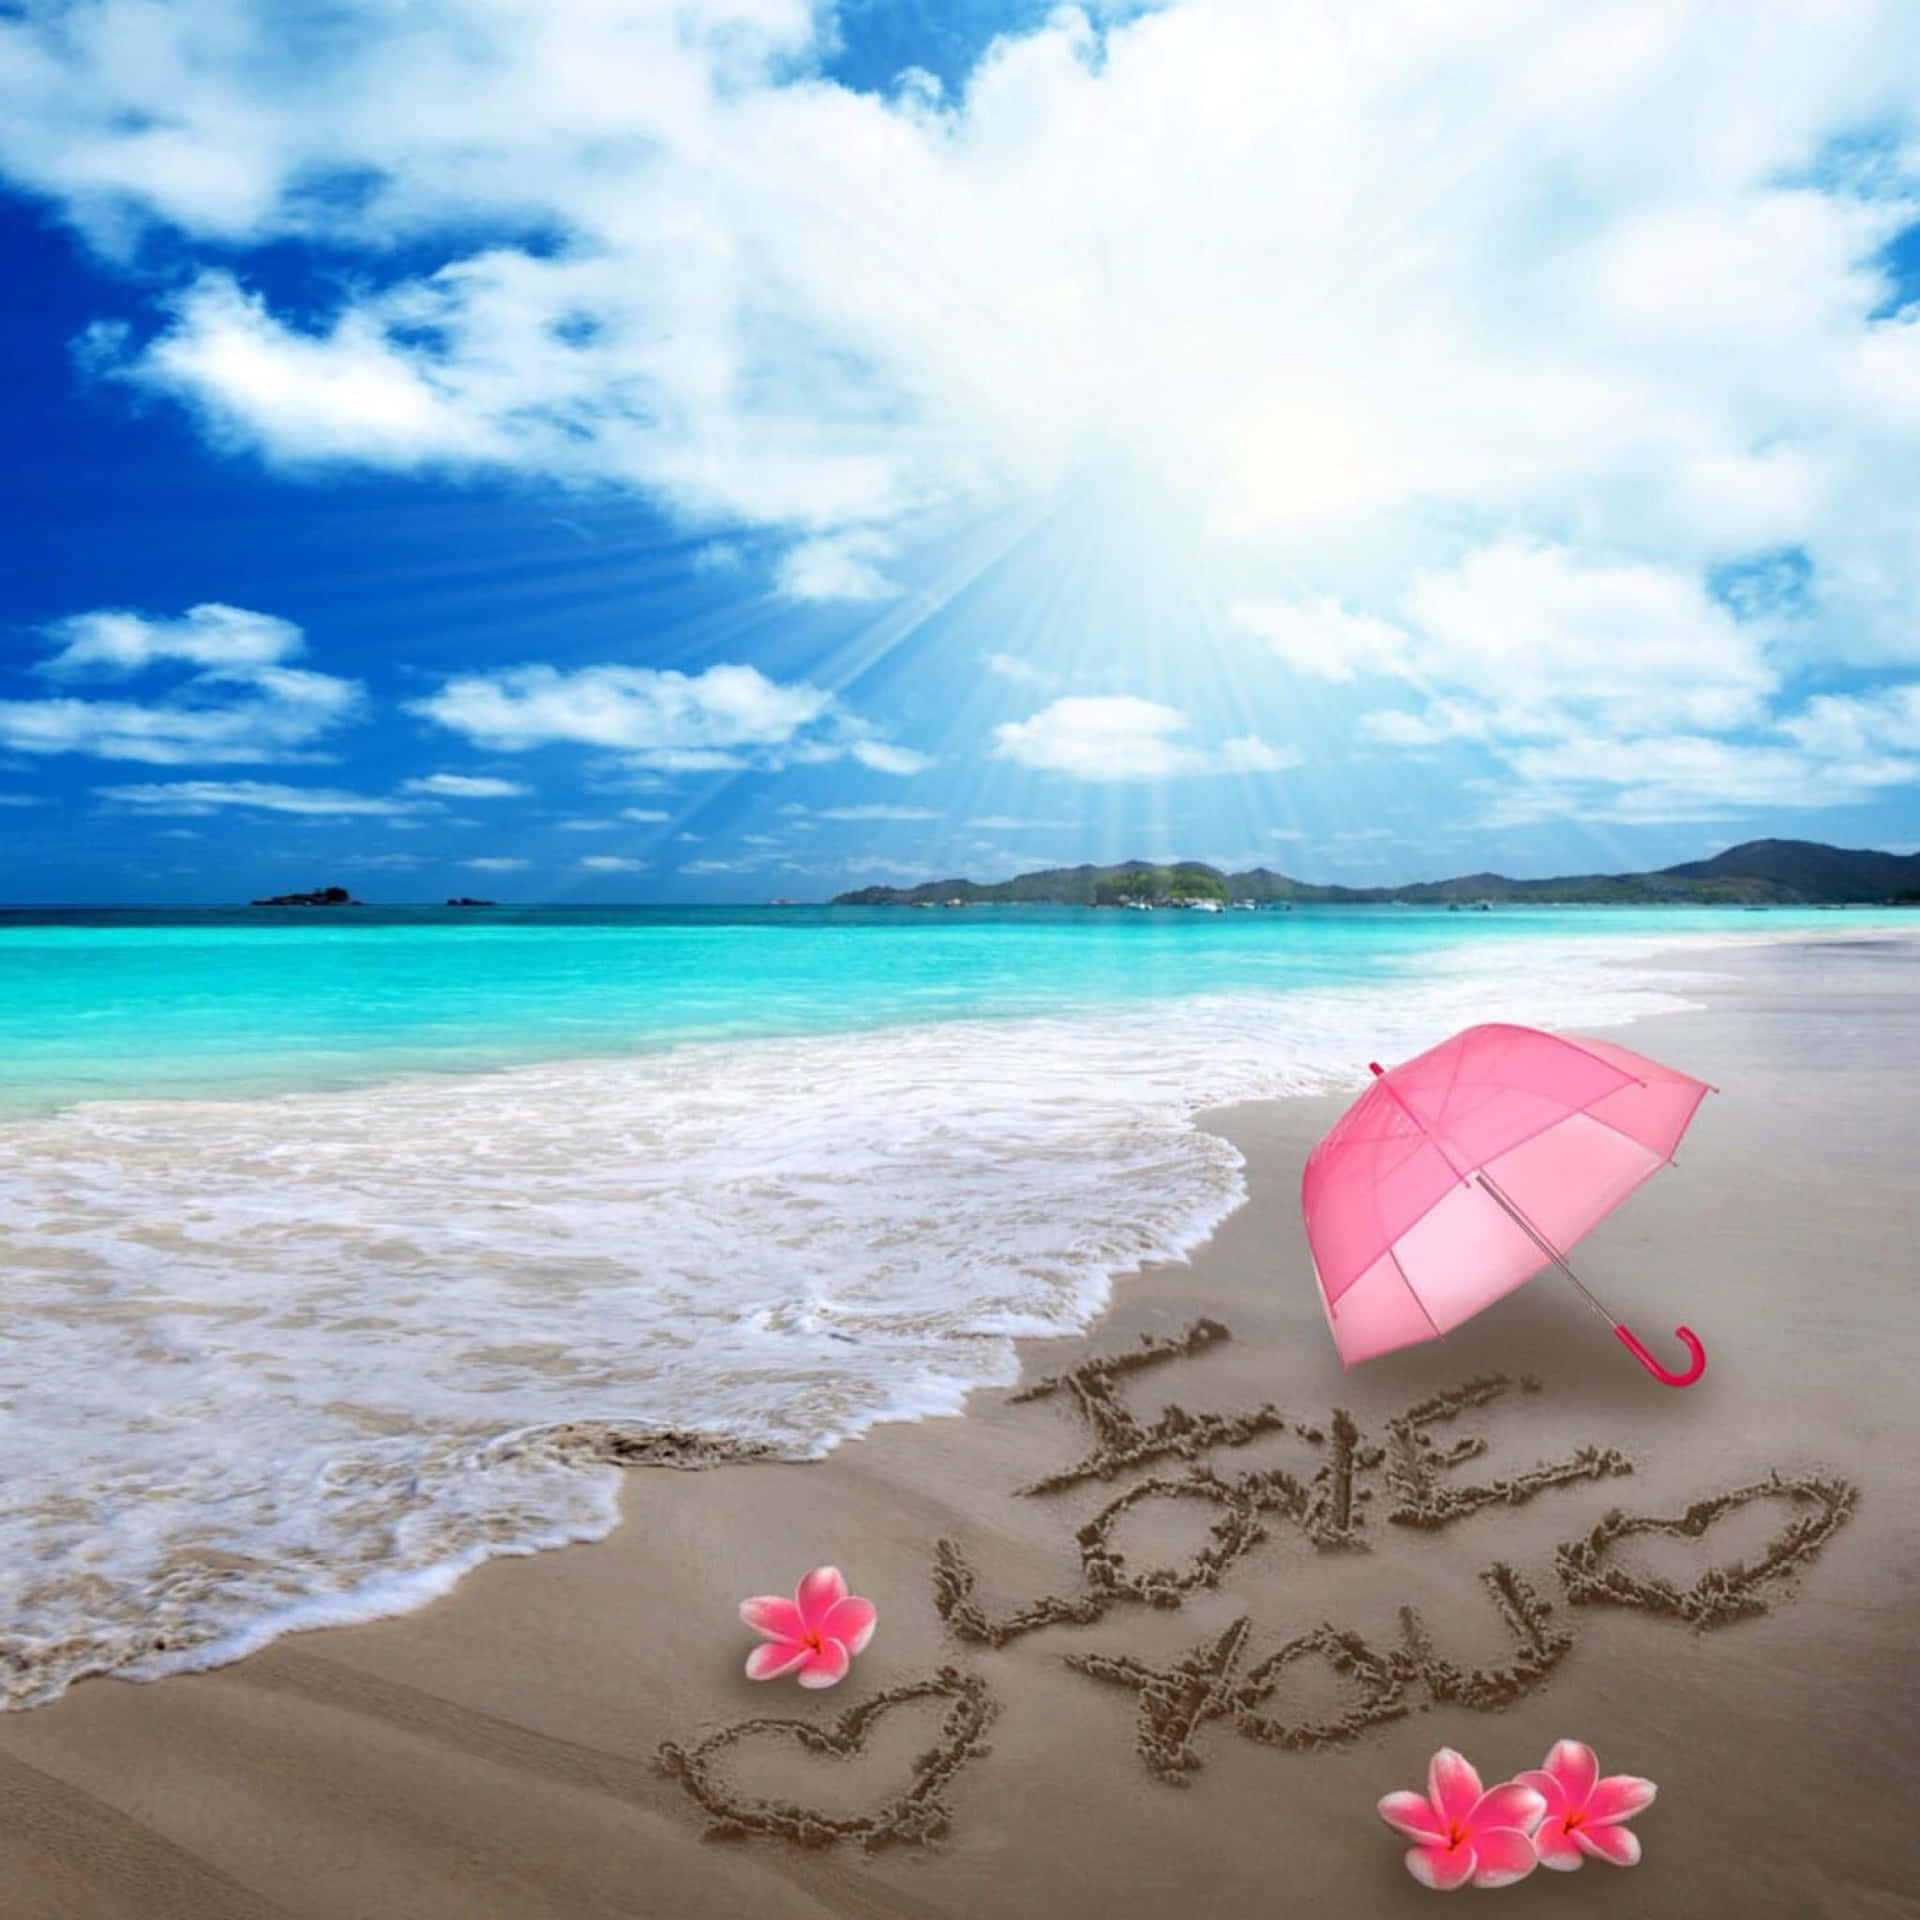 Enjoy The Perfect Ocean View From This Cute Beach Background